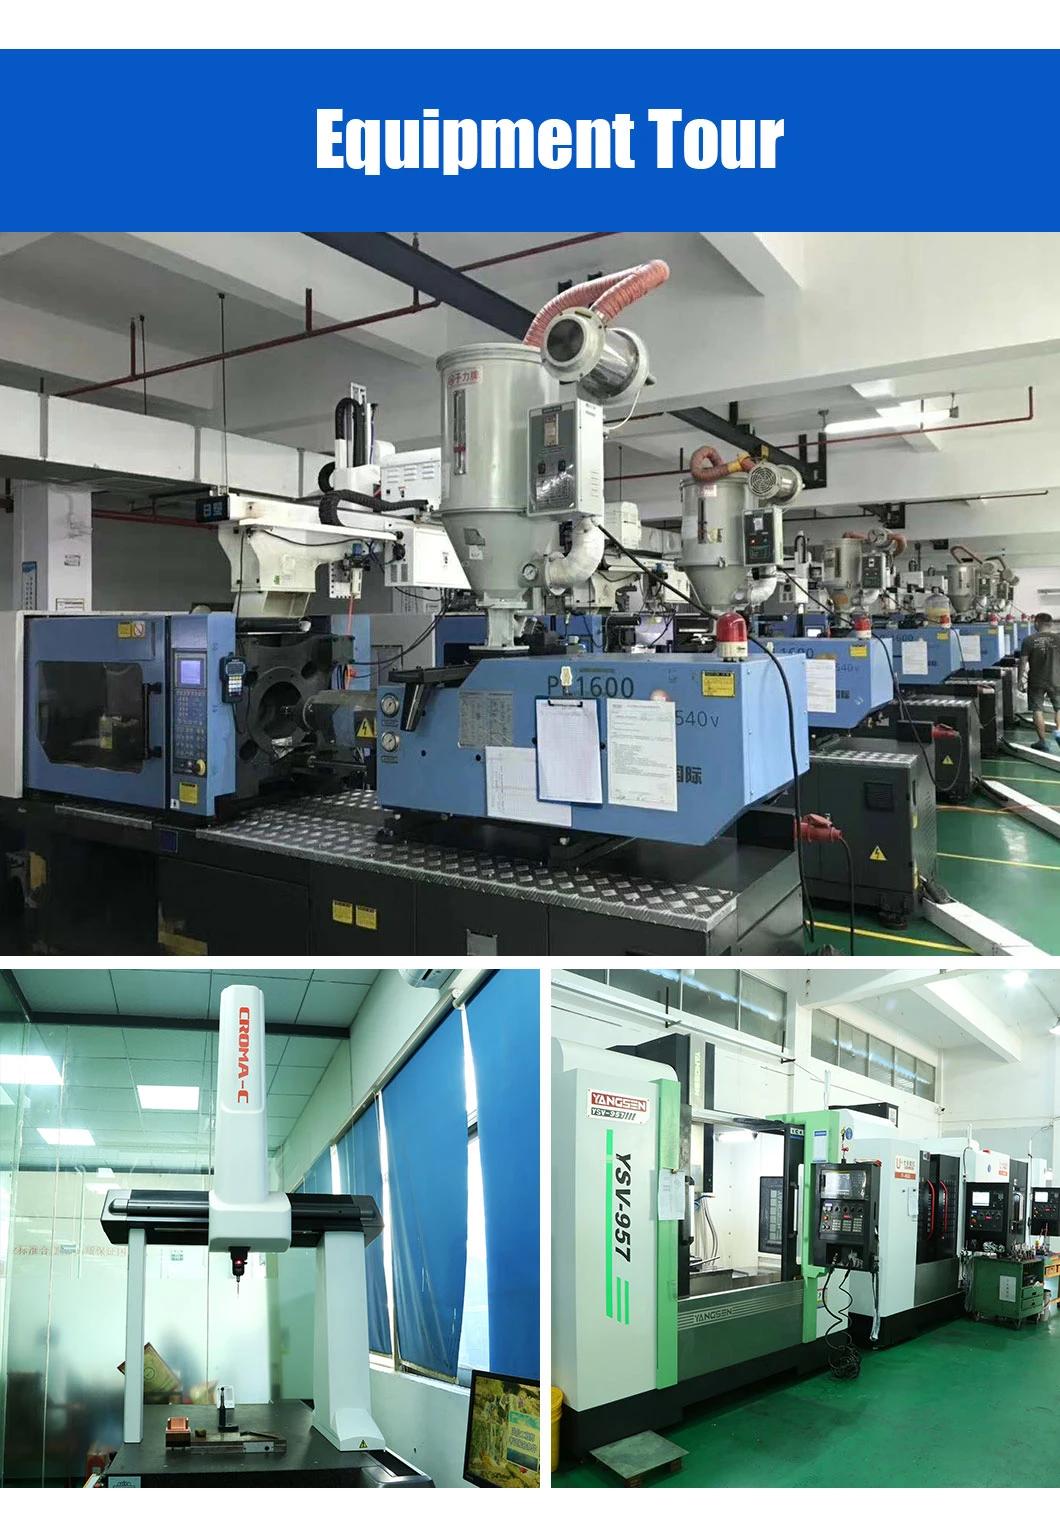 Customized Plastic Injection Mould Maker/Manufacturer/Factory/Suppliers From China